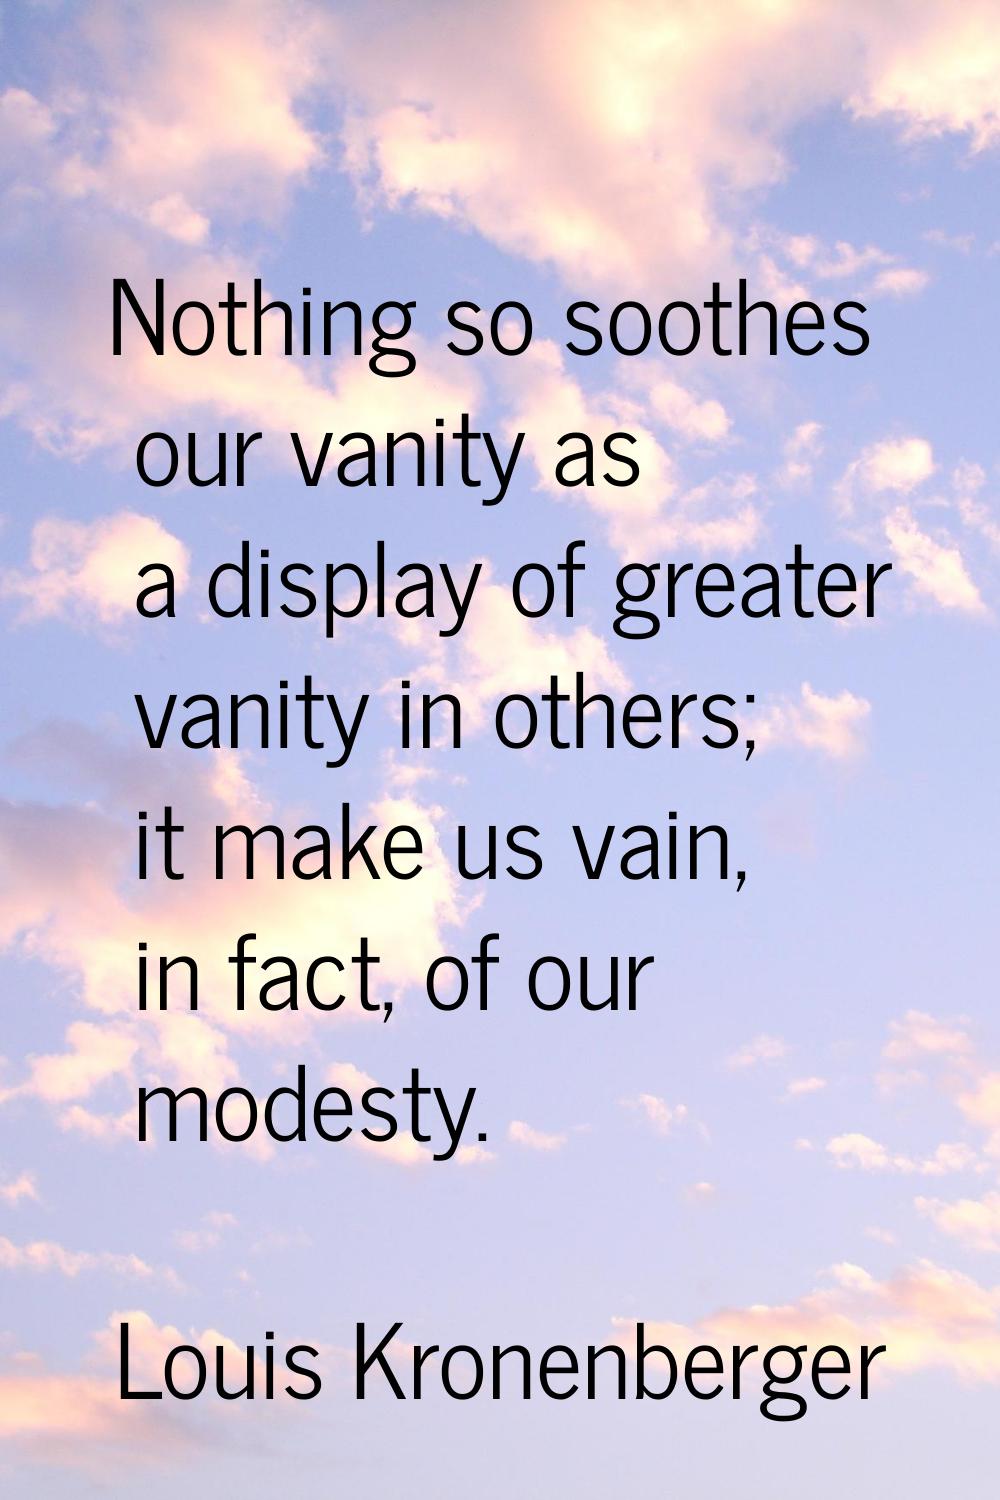 Nothing so soothes our vanity as a display of greater vanity in others; it make us vain, in fact, o